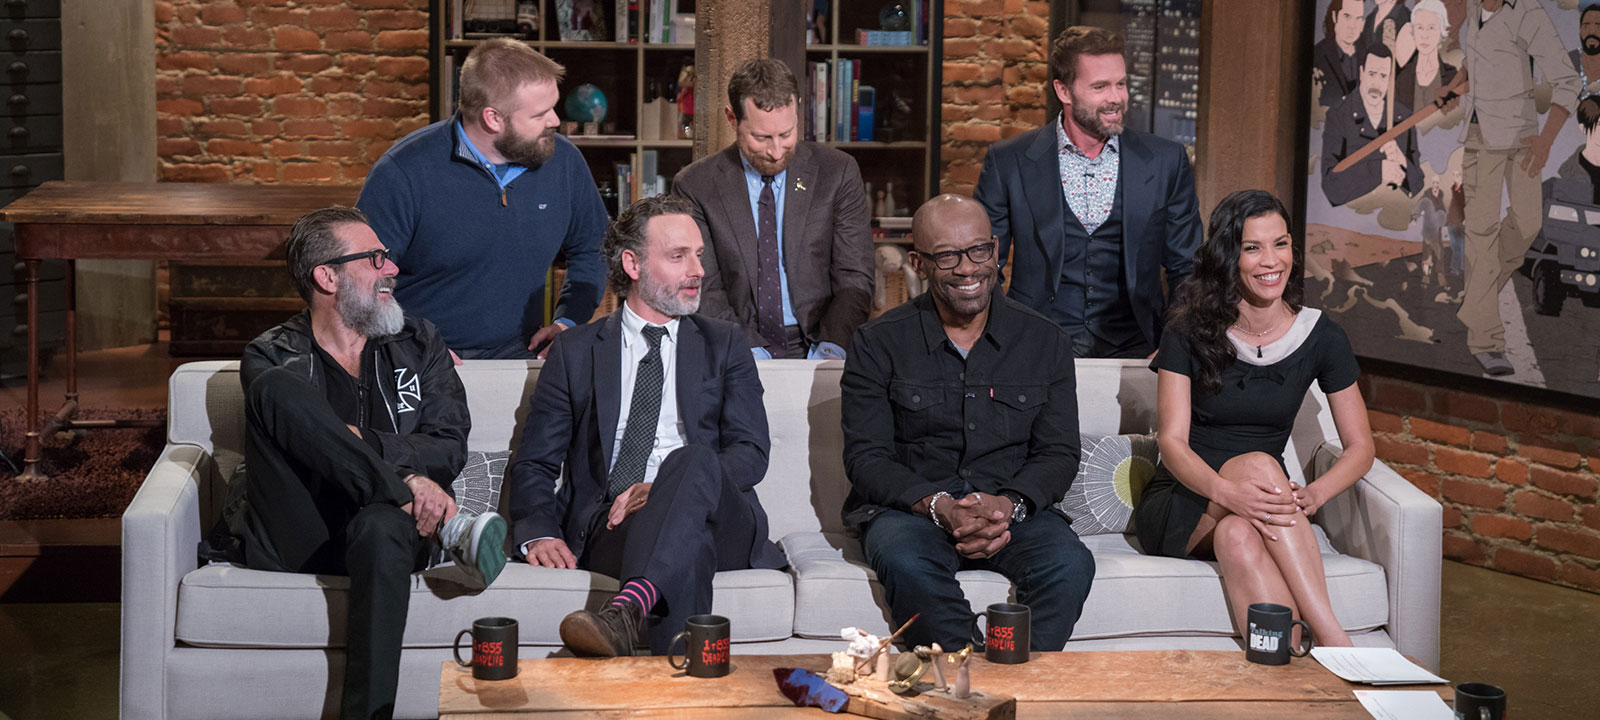 ALERT:Episode of the Talking Dead Cancelled due to Coronavirus!